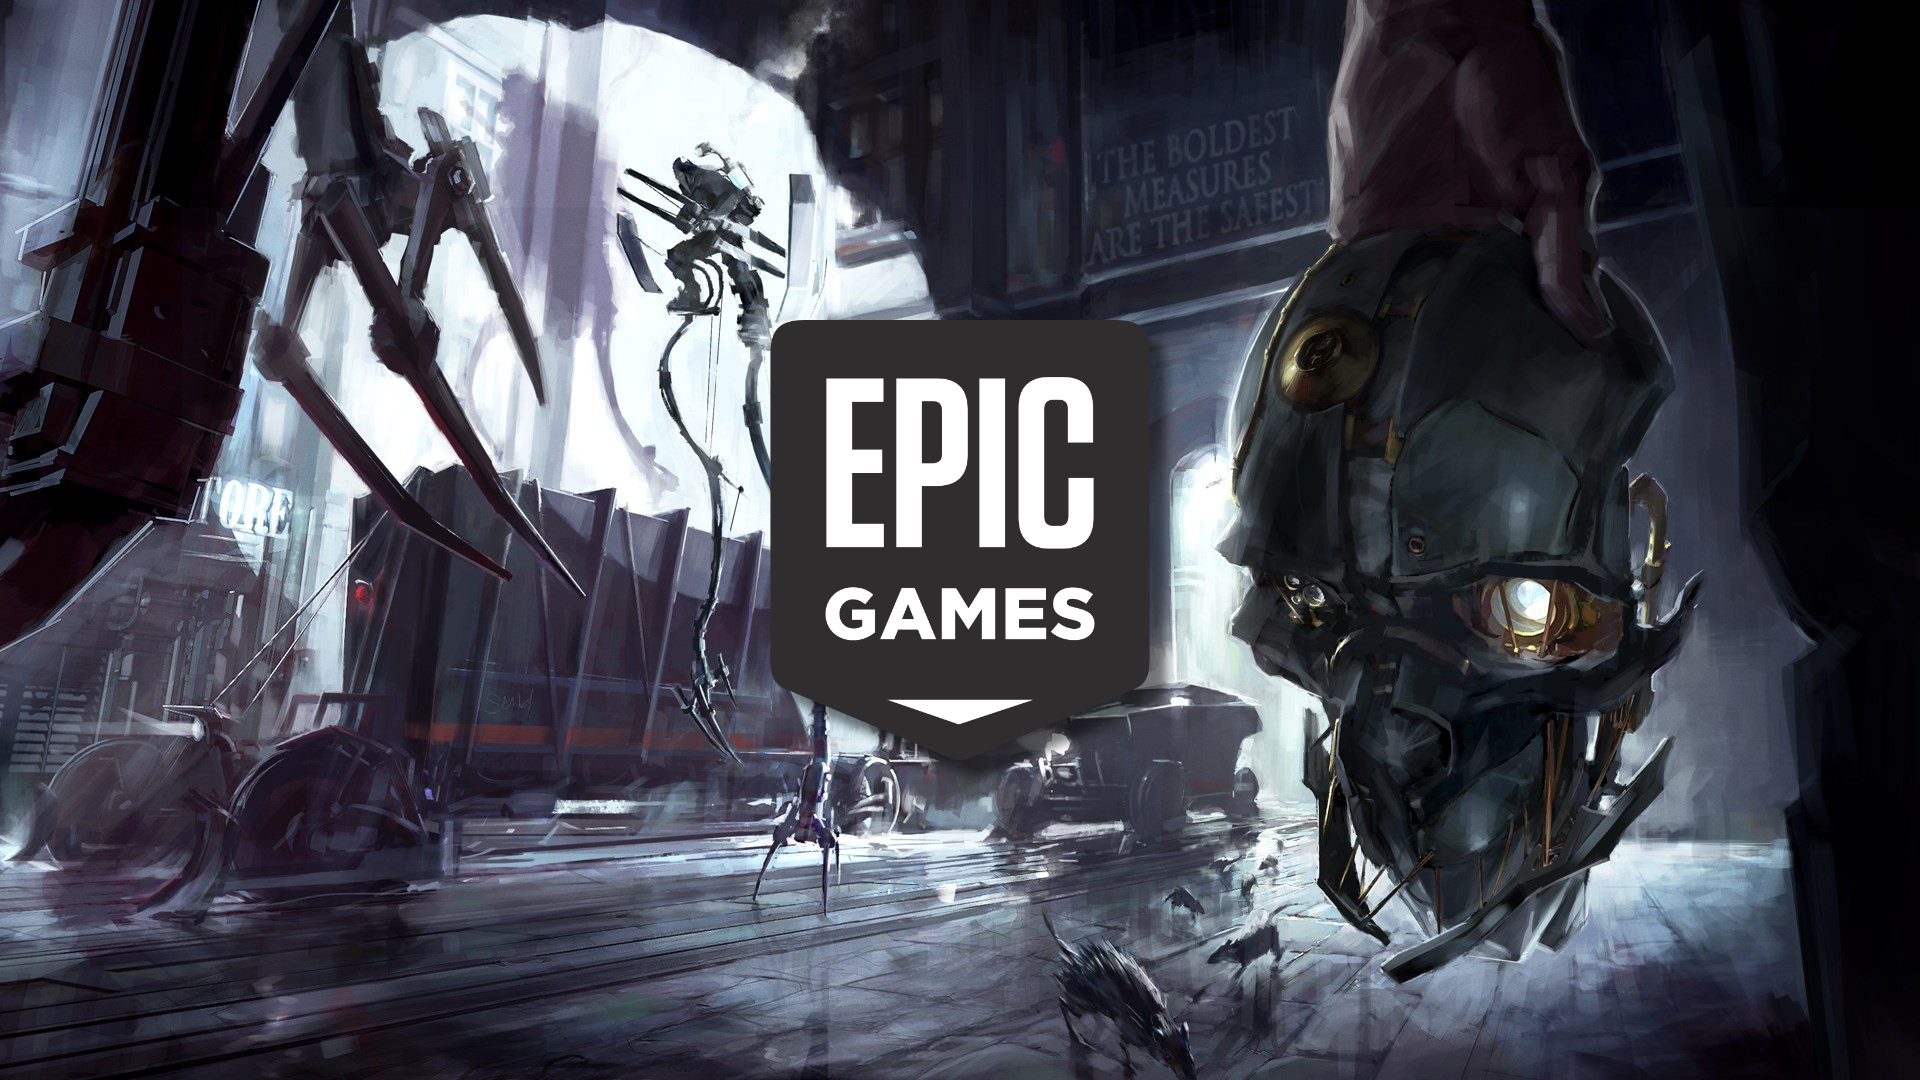 Dishonored 2 | Baixe e compre hoje - Epic Games Store